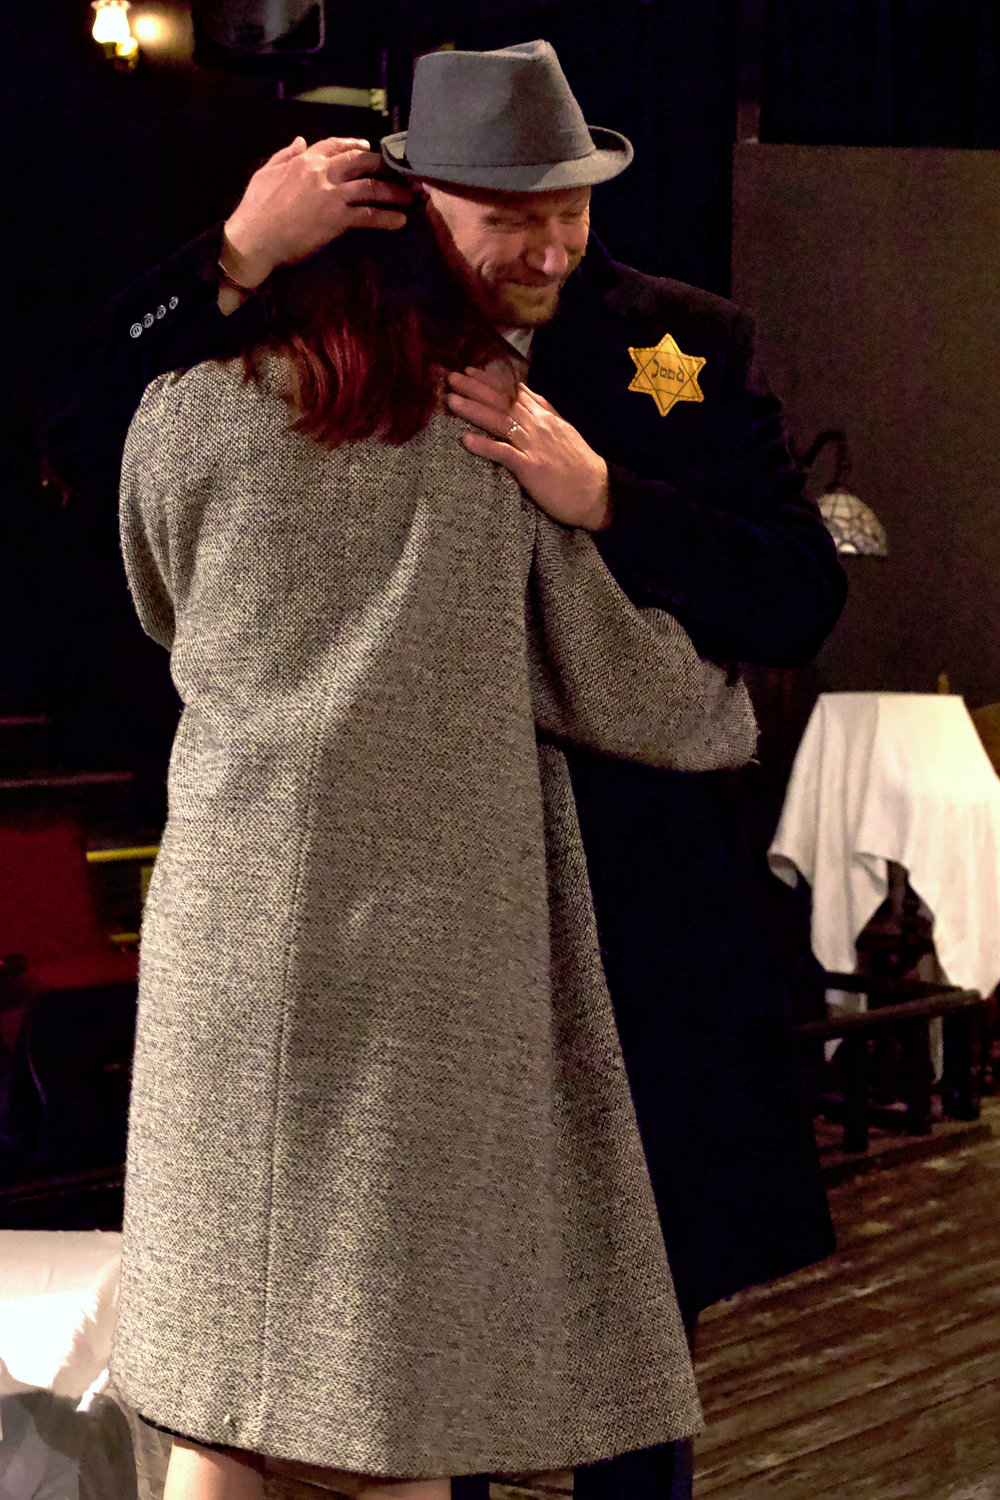 Sam Overton as Otto Frank embraces Lizze Conner as Margot Frank during a rehearsal of “The Diary of Anne Frank” at the Evergreen Playhouse in Centralia last week.